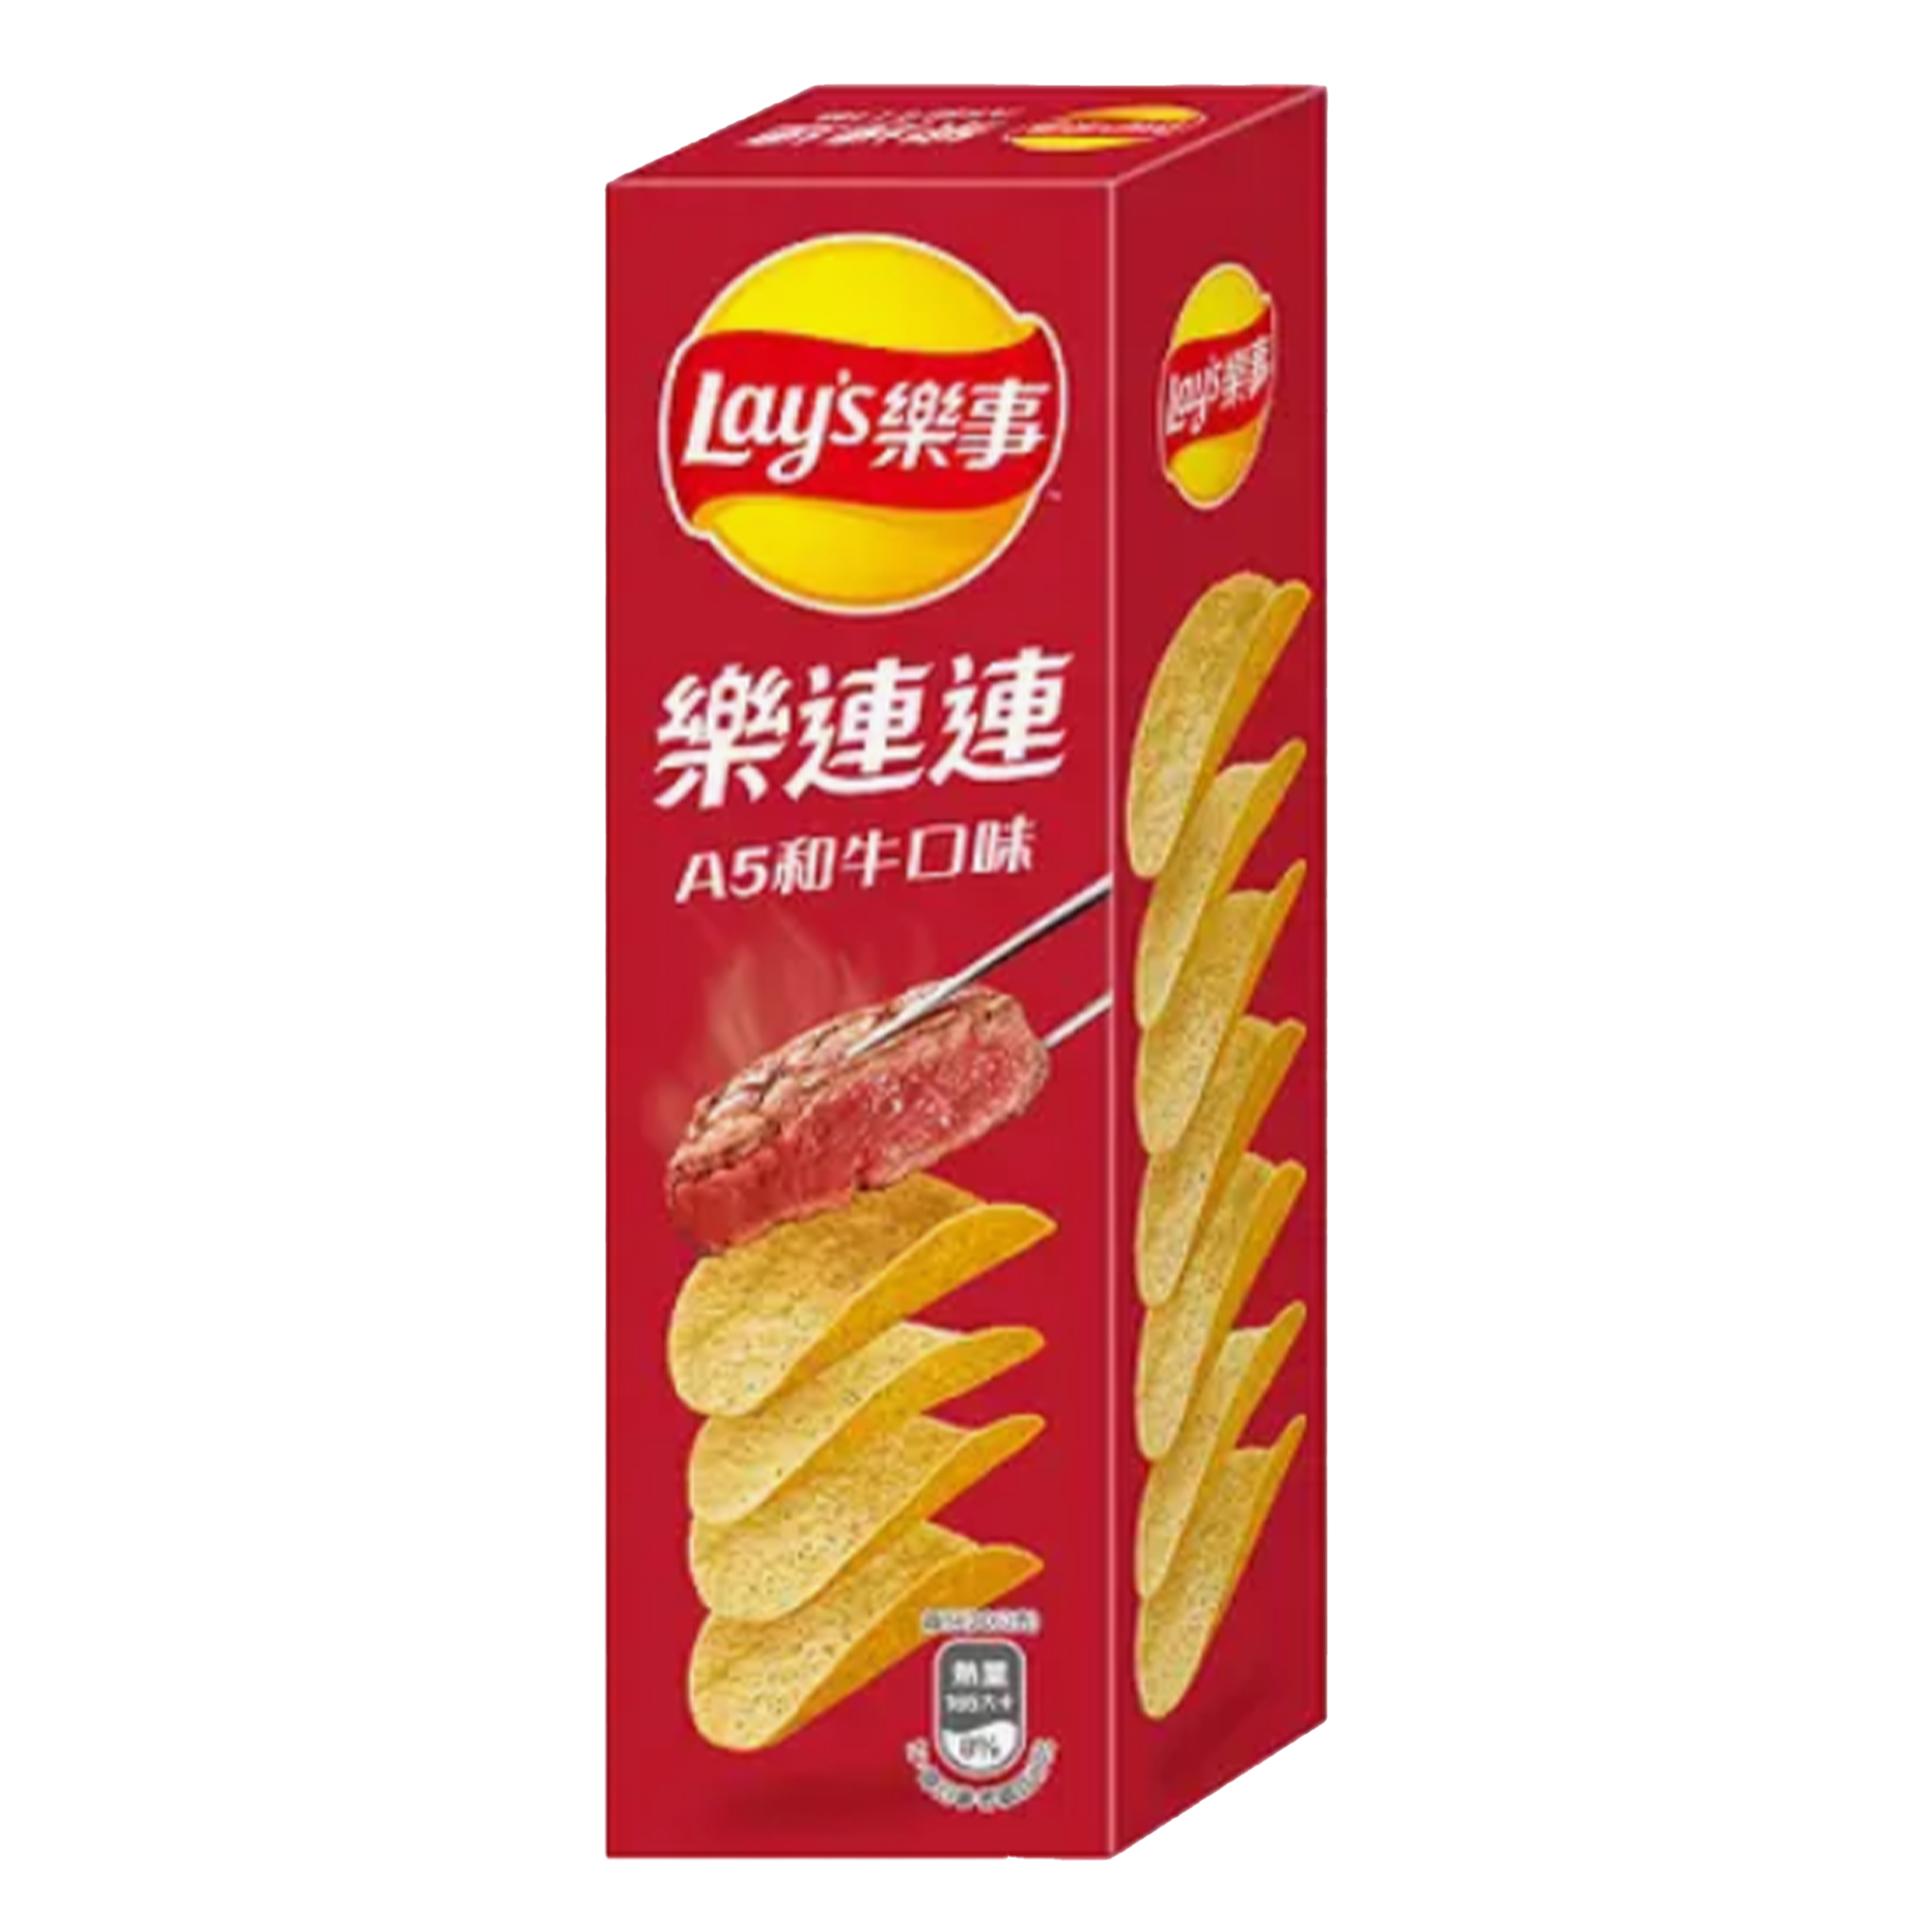 Lays Stax - A5 Wagyu Beef (Asia)